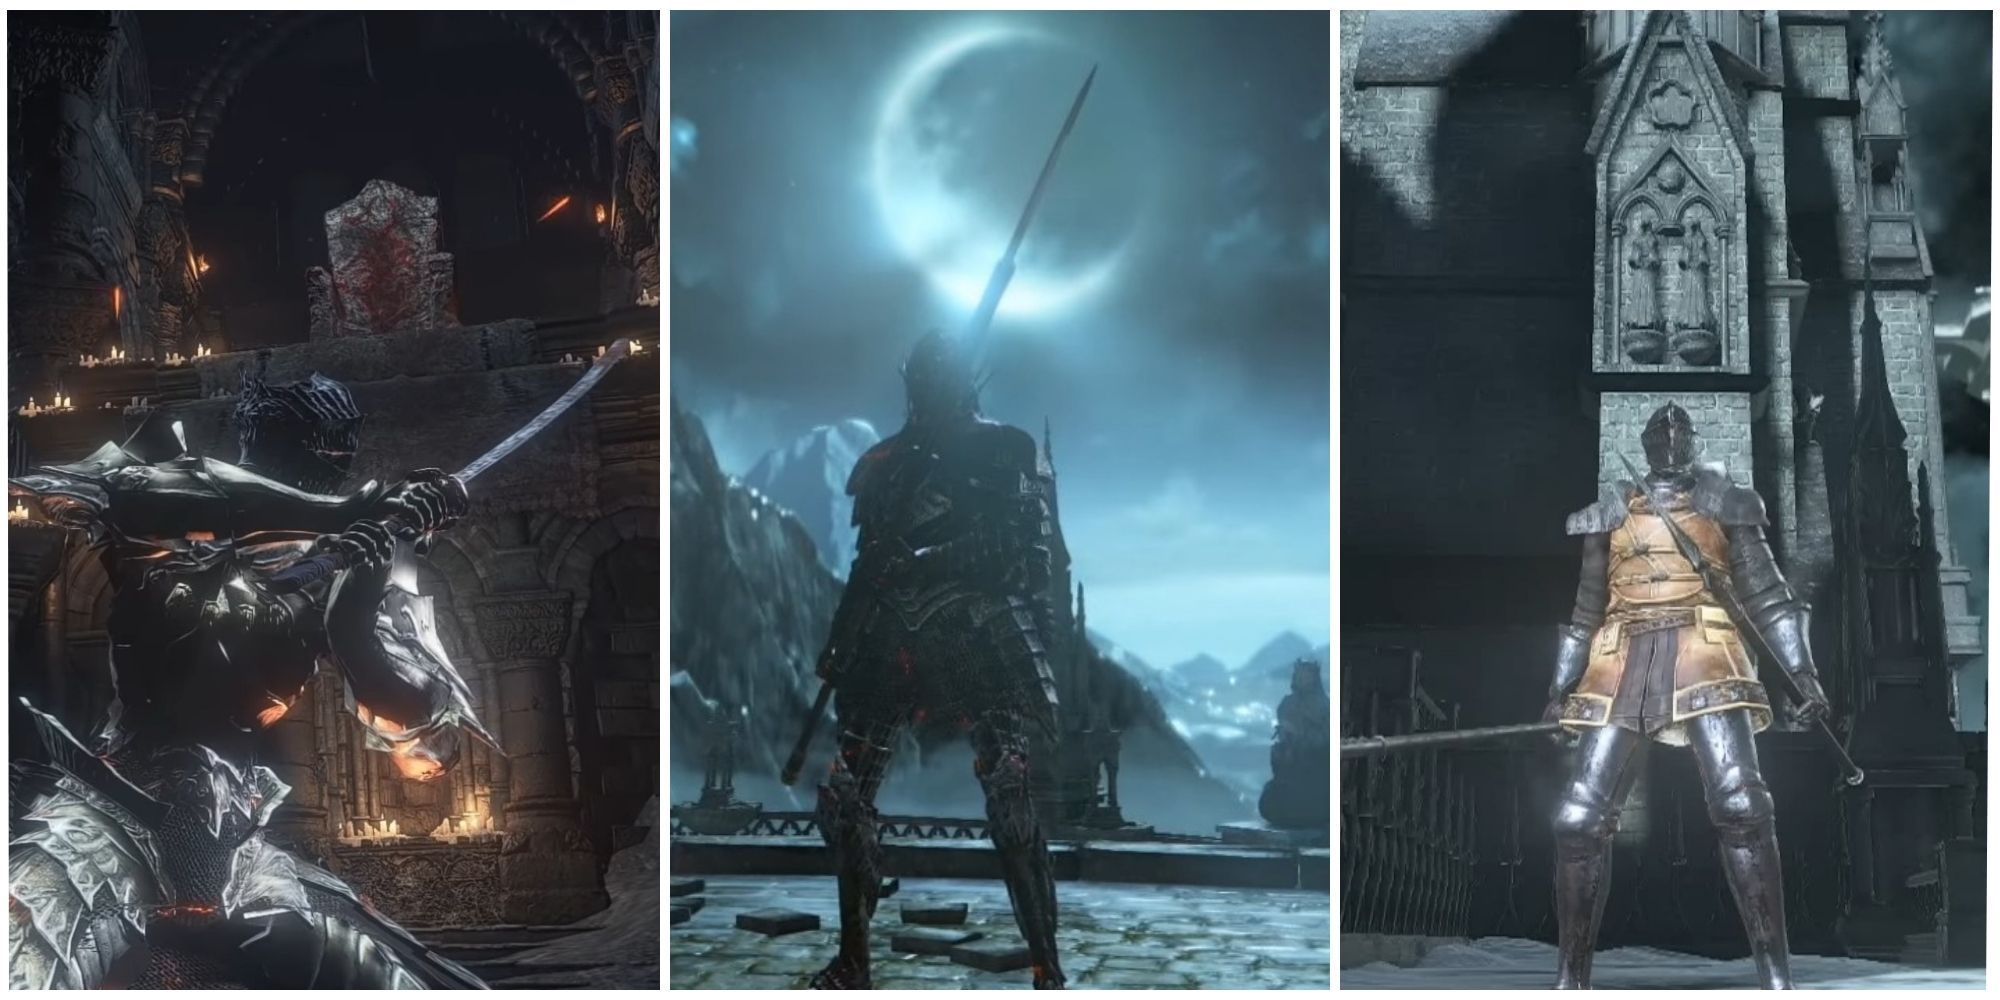 Dark Souls 3 Split Image with Black Knight Glaive in the middle, Chaos Blade on the left and Sellsword Twinspears on the right